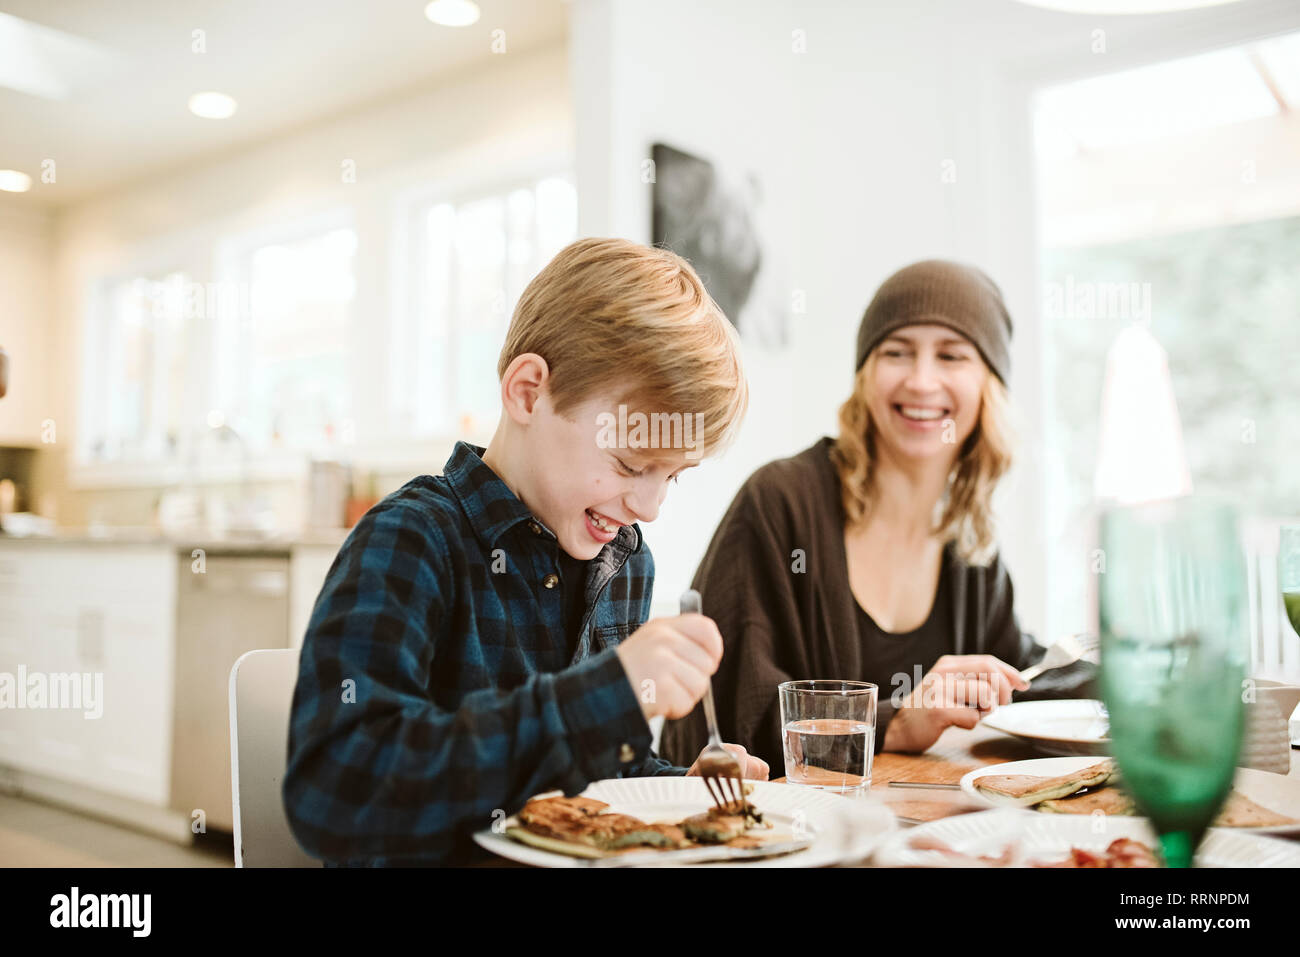 Mother and son eating pancake breakfast at table Stock Photo